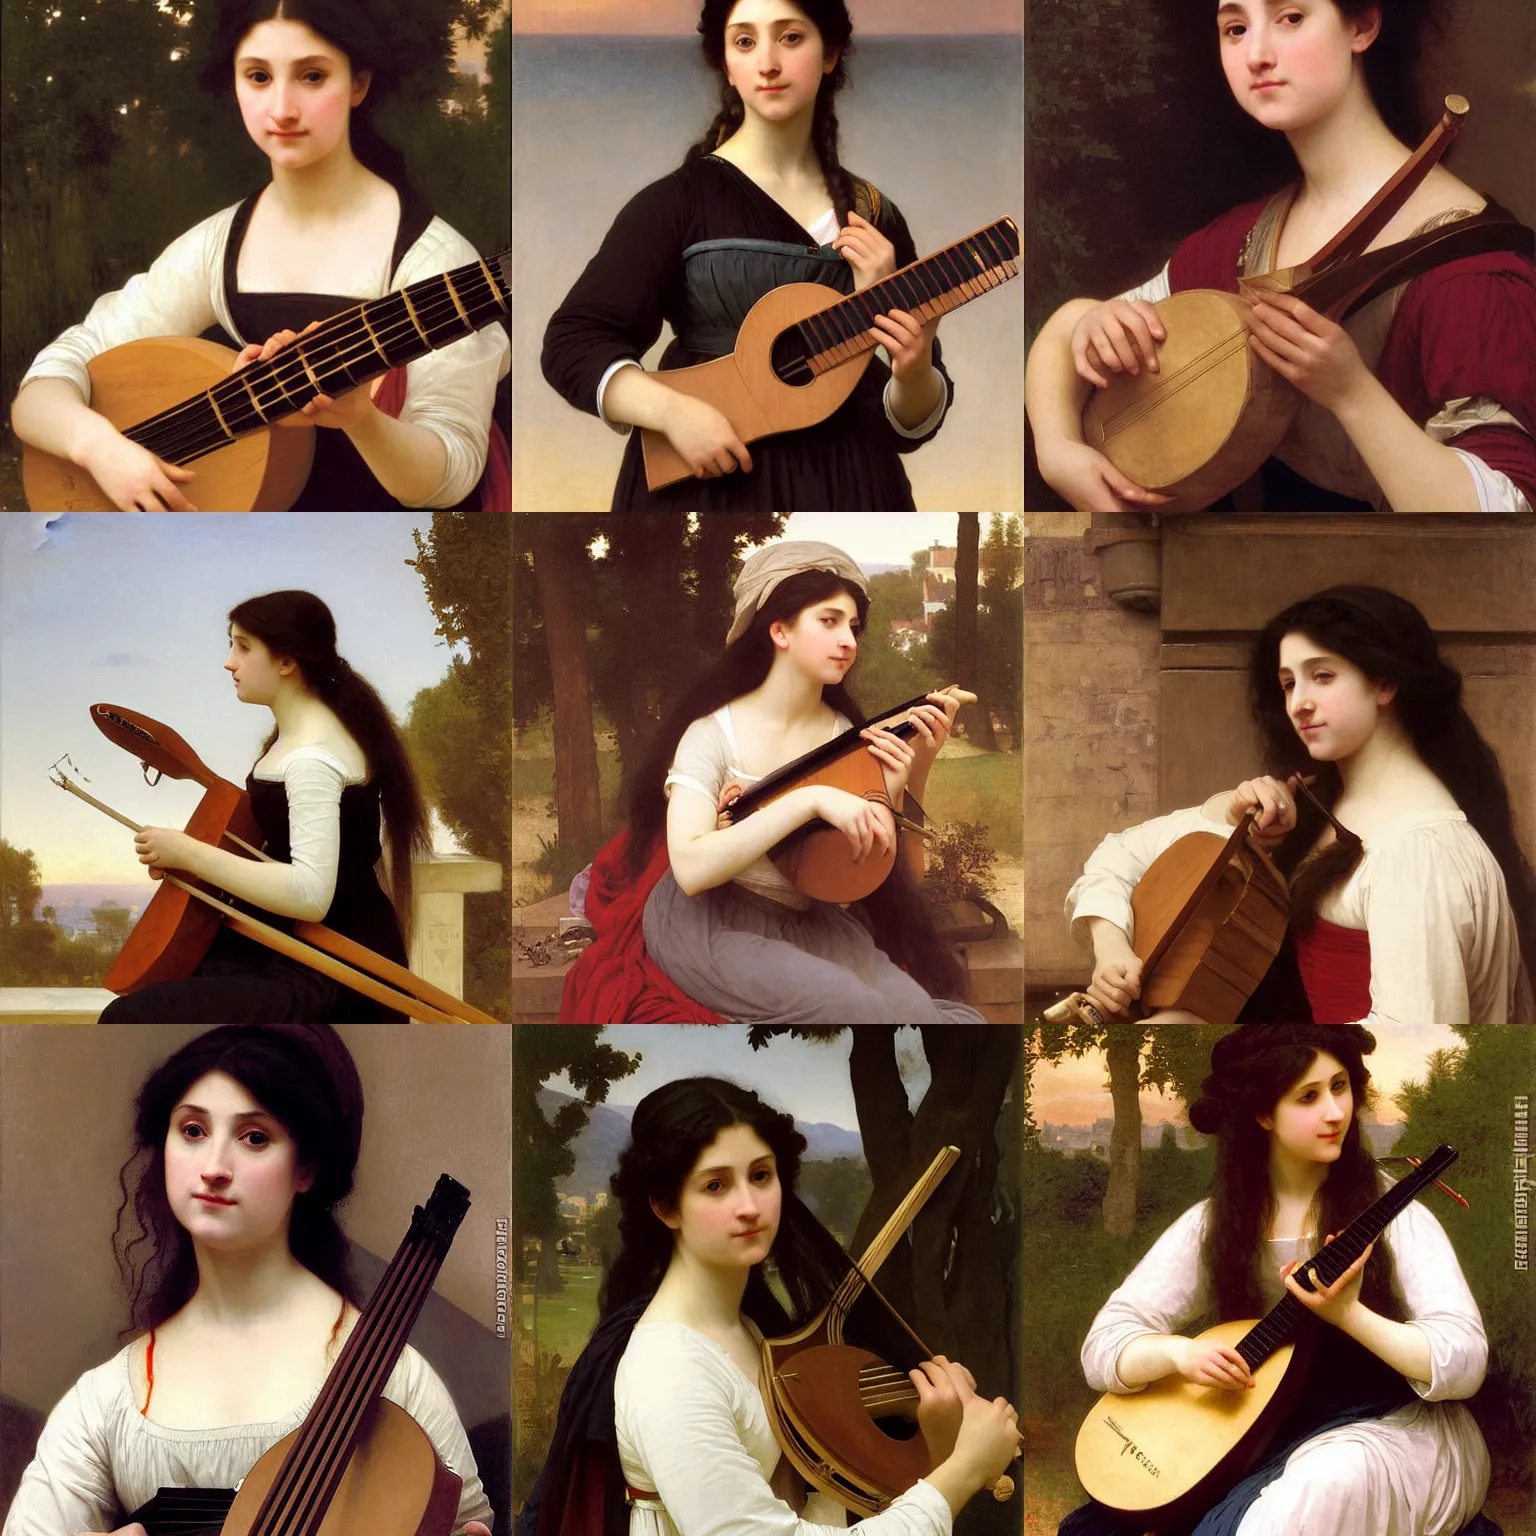 Prompt: Stern English Woman playing the lute. Slender neck. Master Lutist. Long dark hair. Art by William-Adolphe Bouguereau. During golden hour. Extremely detailed. Beautiful. 4K. Award winning.